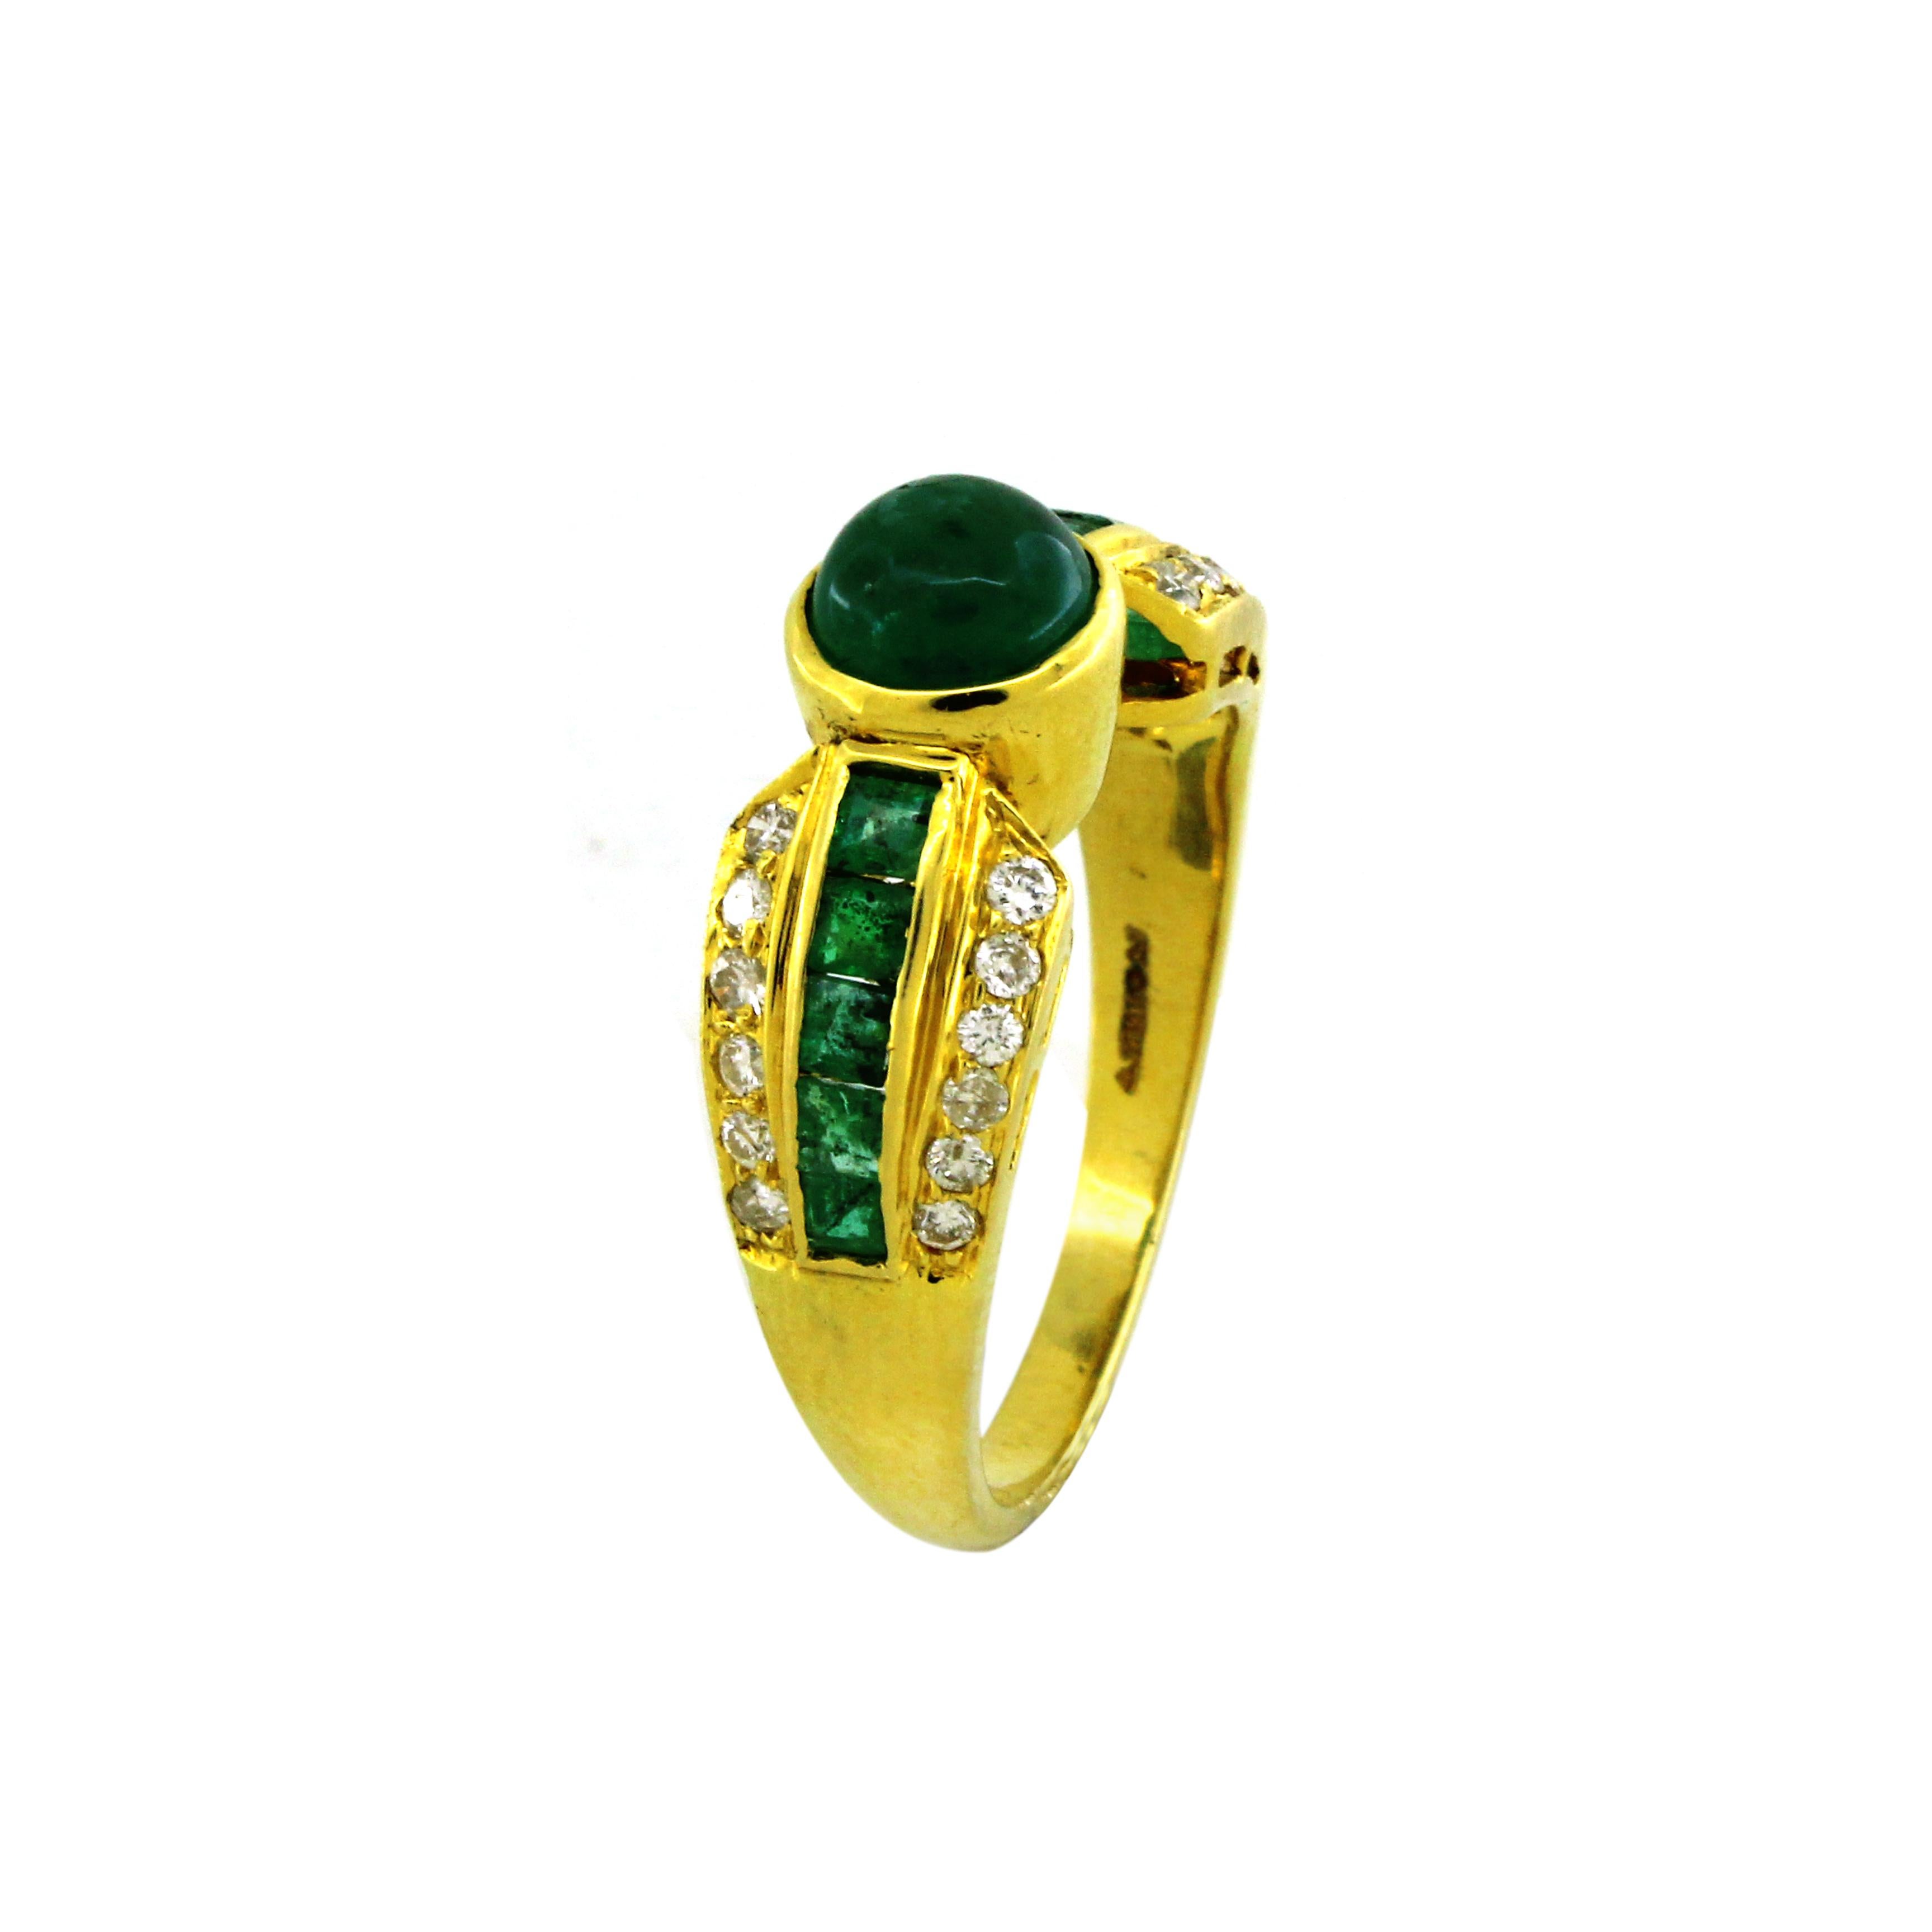 Introducing a stunning masterpiece in jewelry craftsmanship, this exquisite ring is crafted from luxurious 22K yellow gold, weighing 4.45 grams. The focal point is a resplendent 1.58-carat emerald, radiating elegance and opulence. The design is both